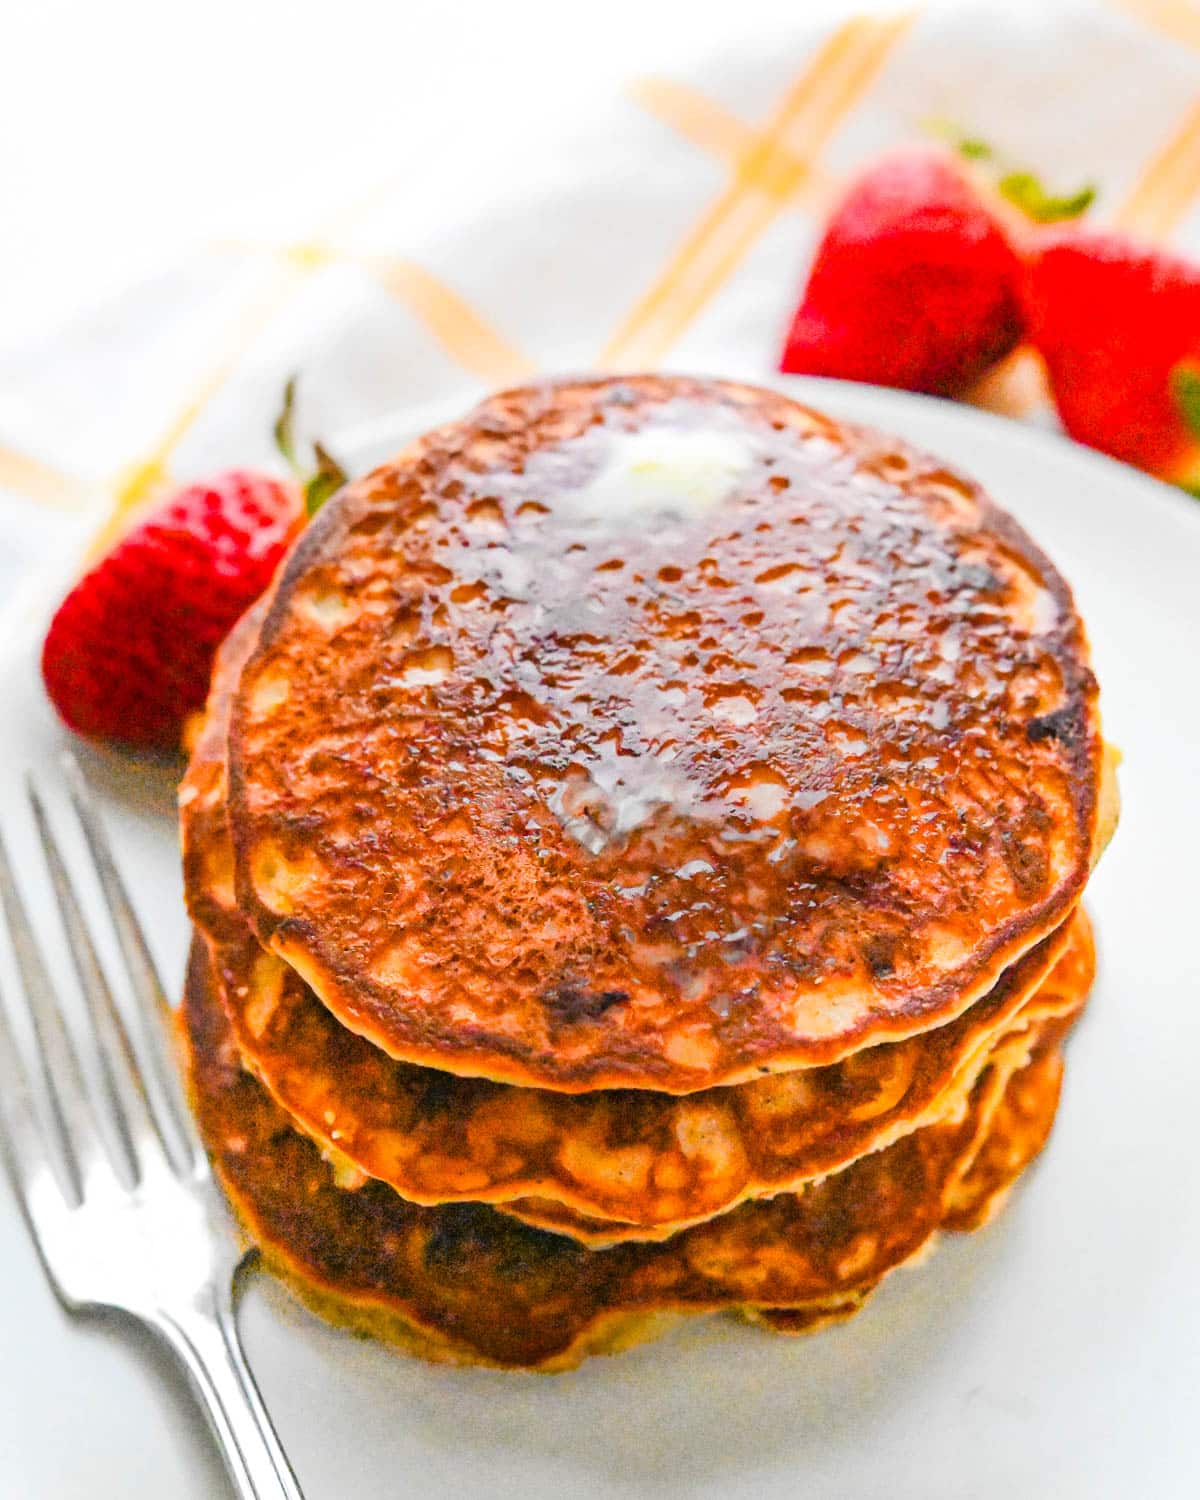 A stack of almond flour banana pancakes on a plate with strawberries.